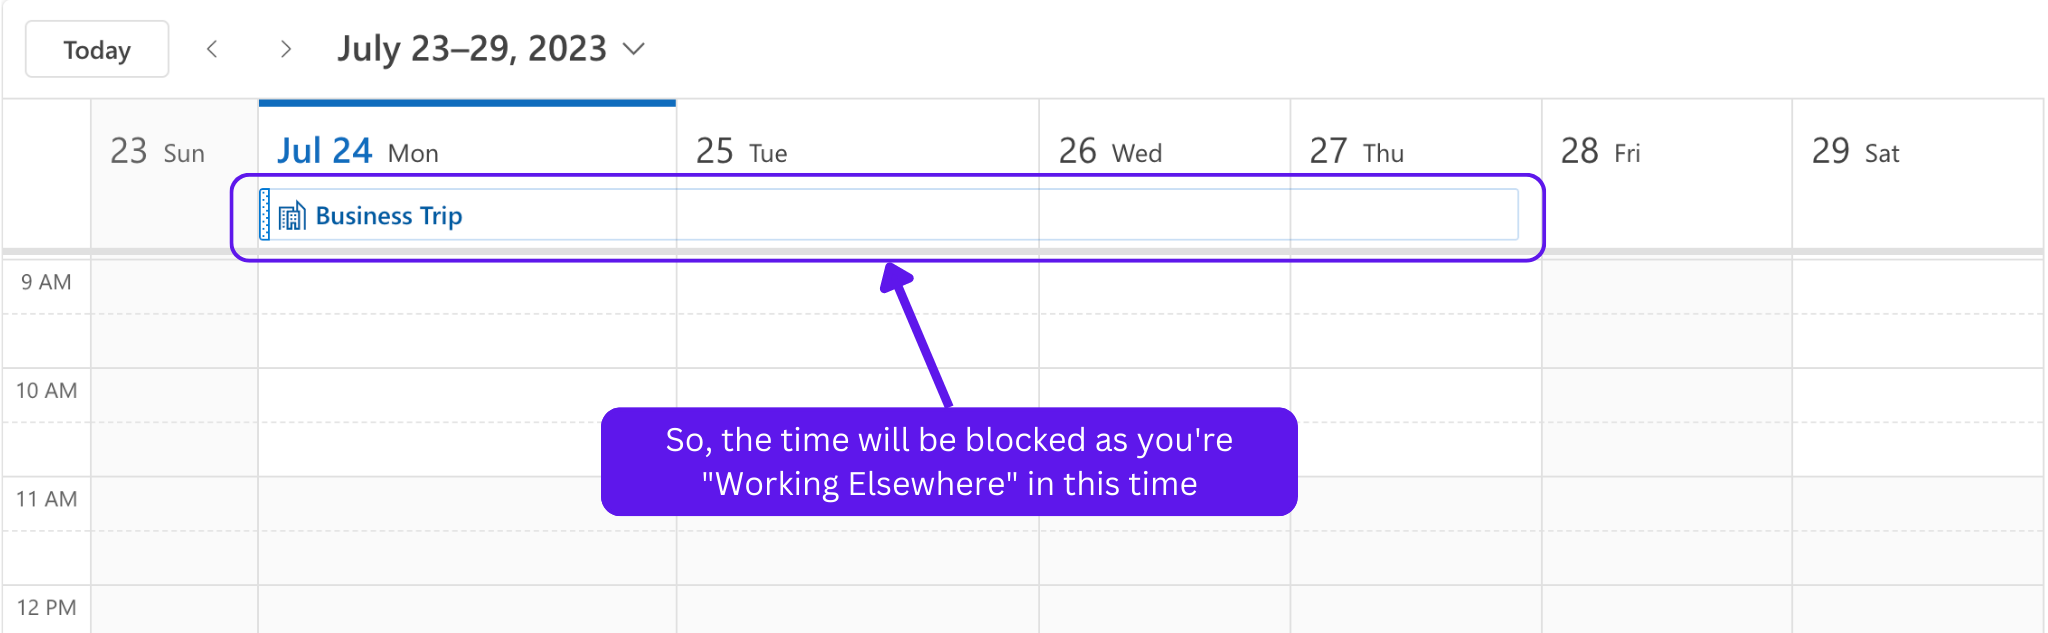 How to Show Working Elsewhere in Outlook Calendar and When?